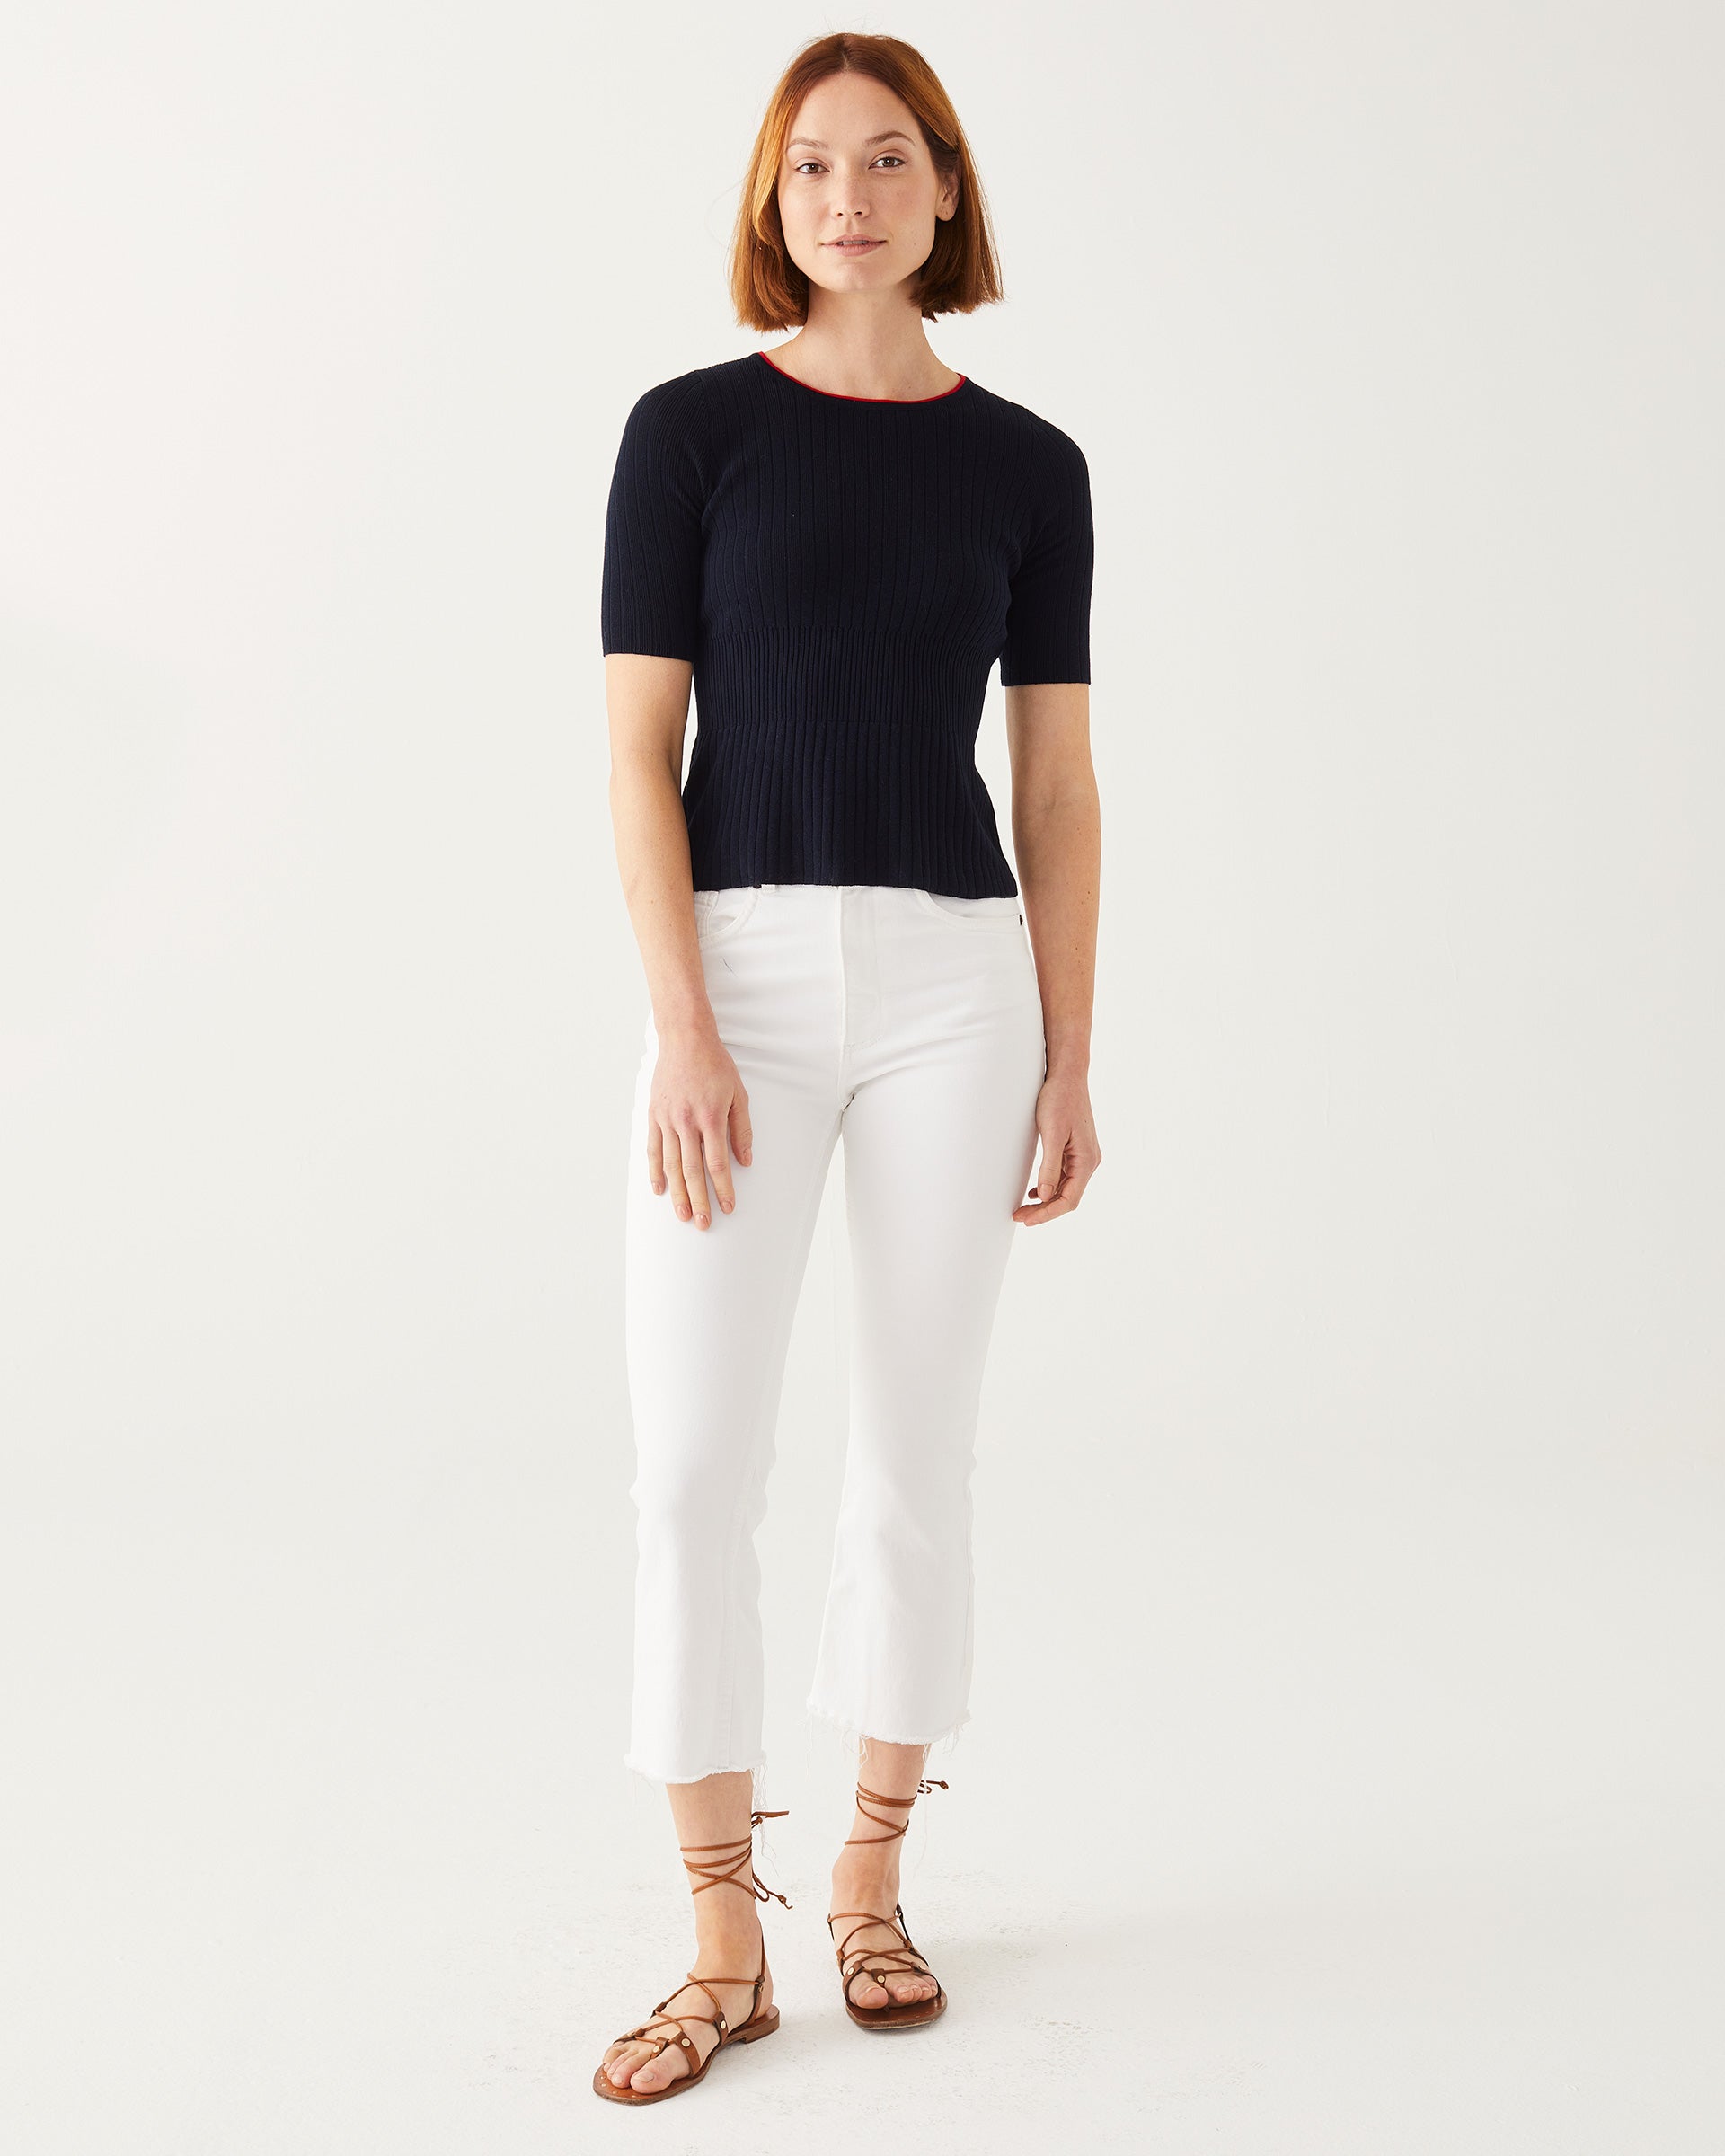 Female wearing white jeans and dark navy top in front of white wall